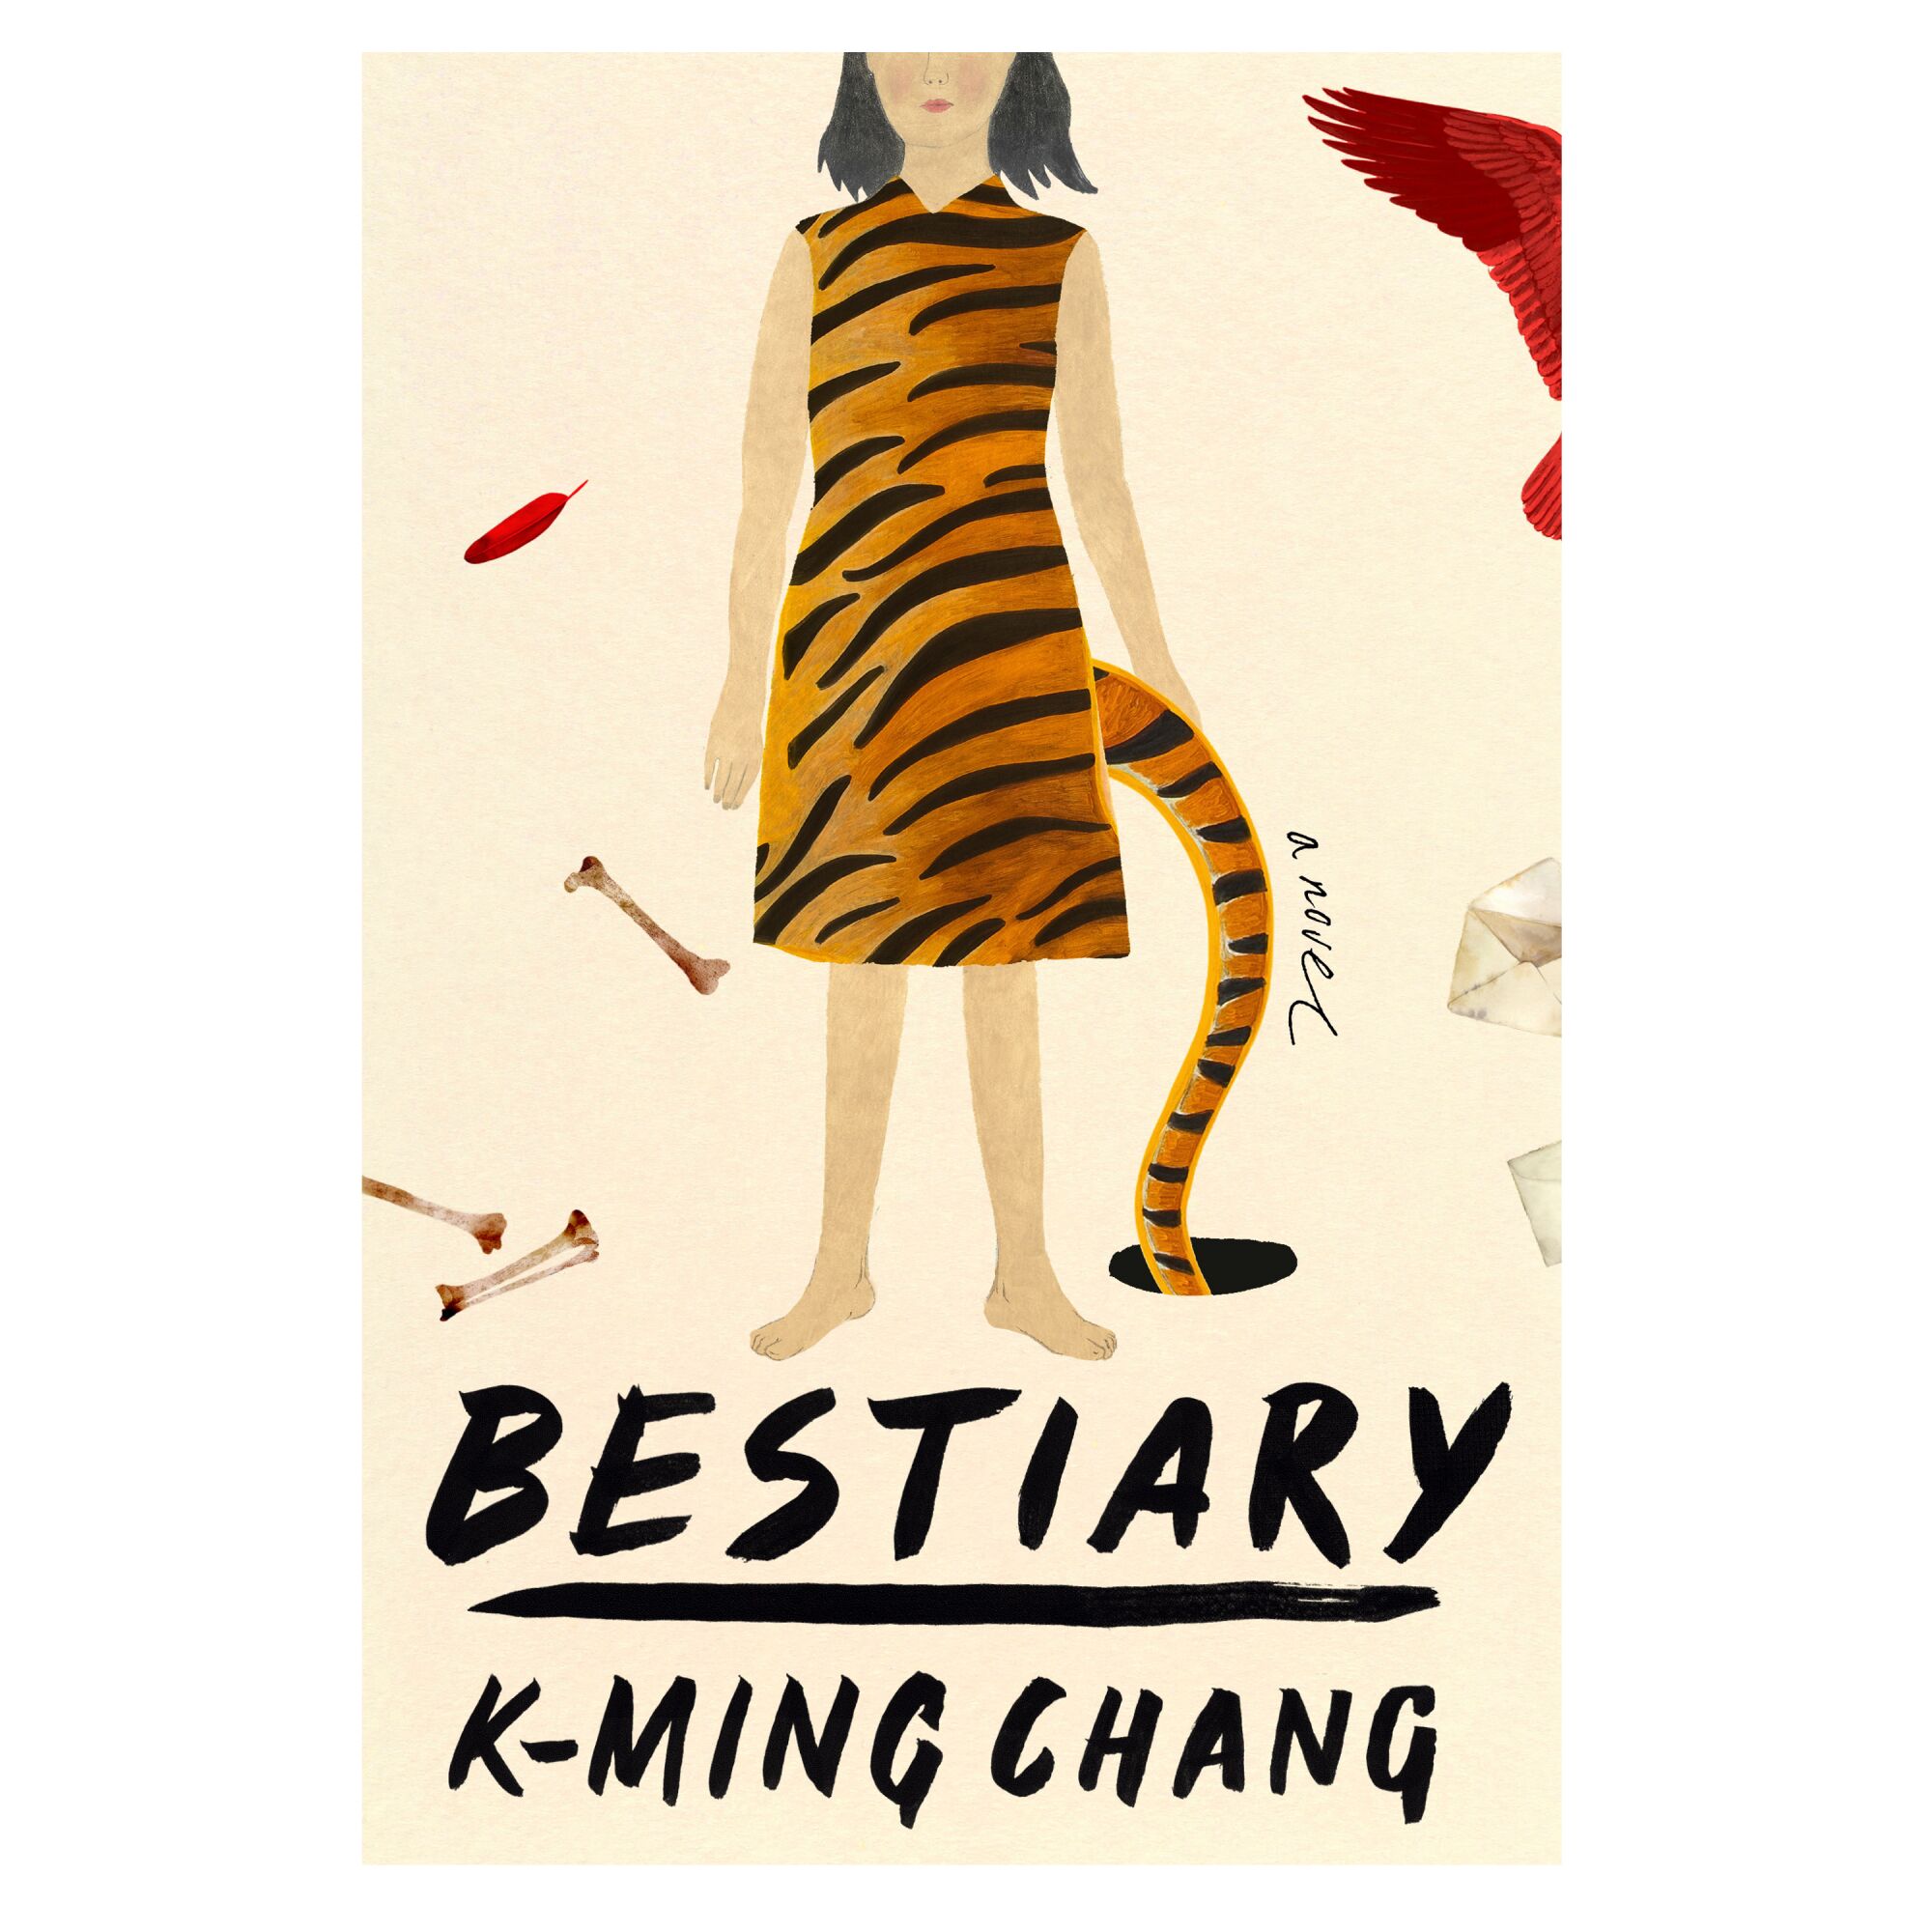 Jacket cover for "Bestiary," by K-Ming Chang.